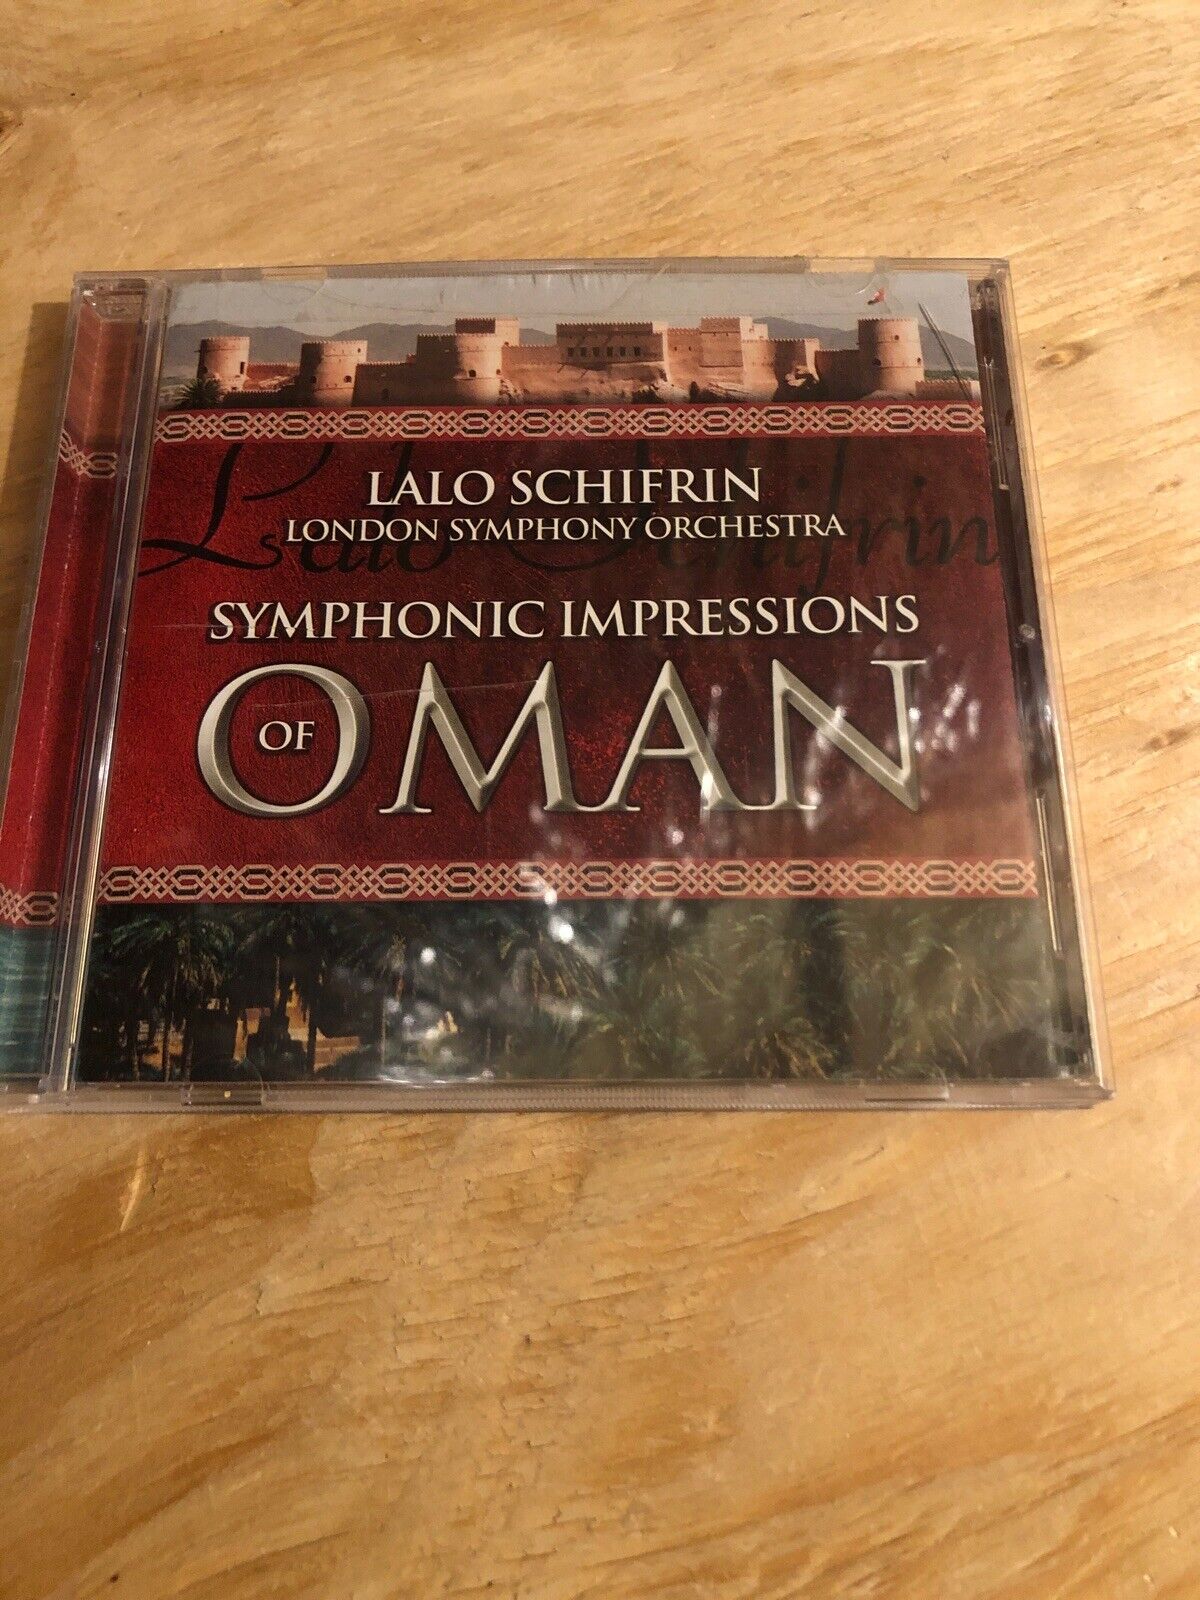 Lalo Schifrin: Symphonic Impressions of Oman by Lalo Schifrin (Composer) (CD,...